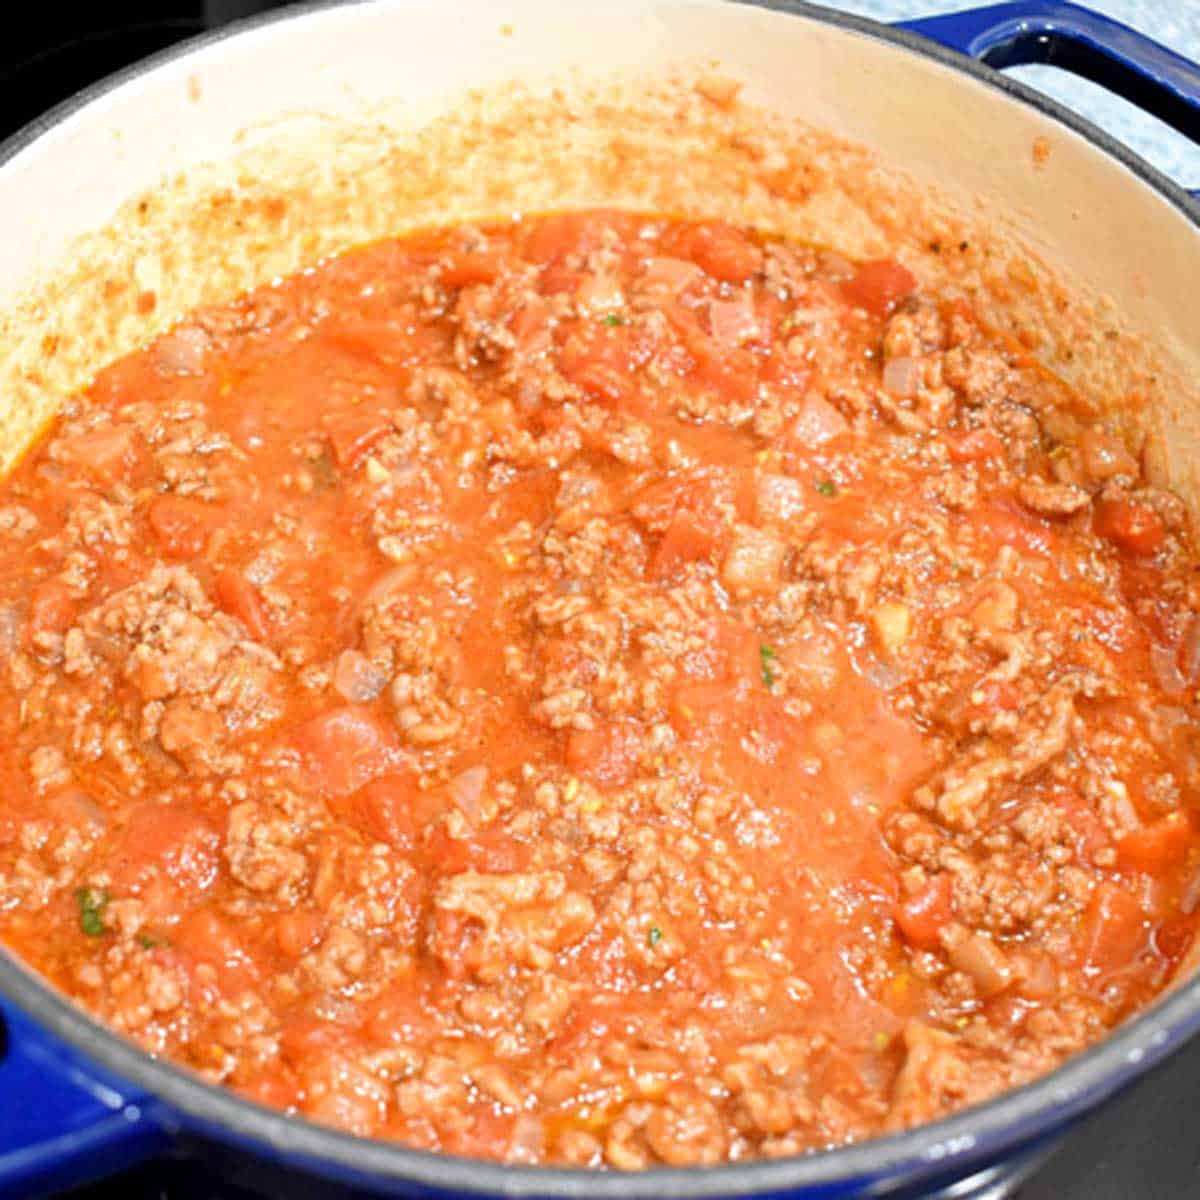 Meat sauce for making gluten free lasagna in a blue Dutch oven.